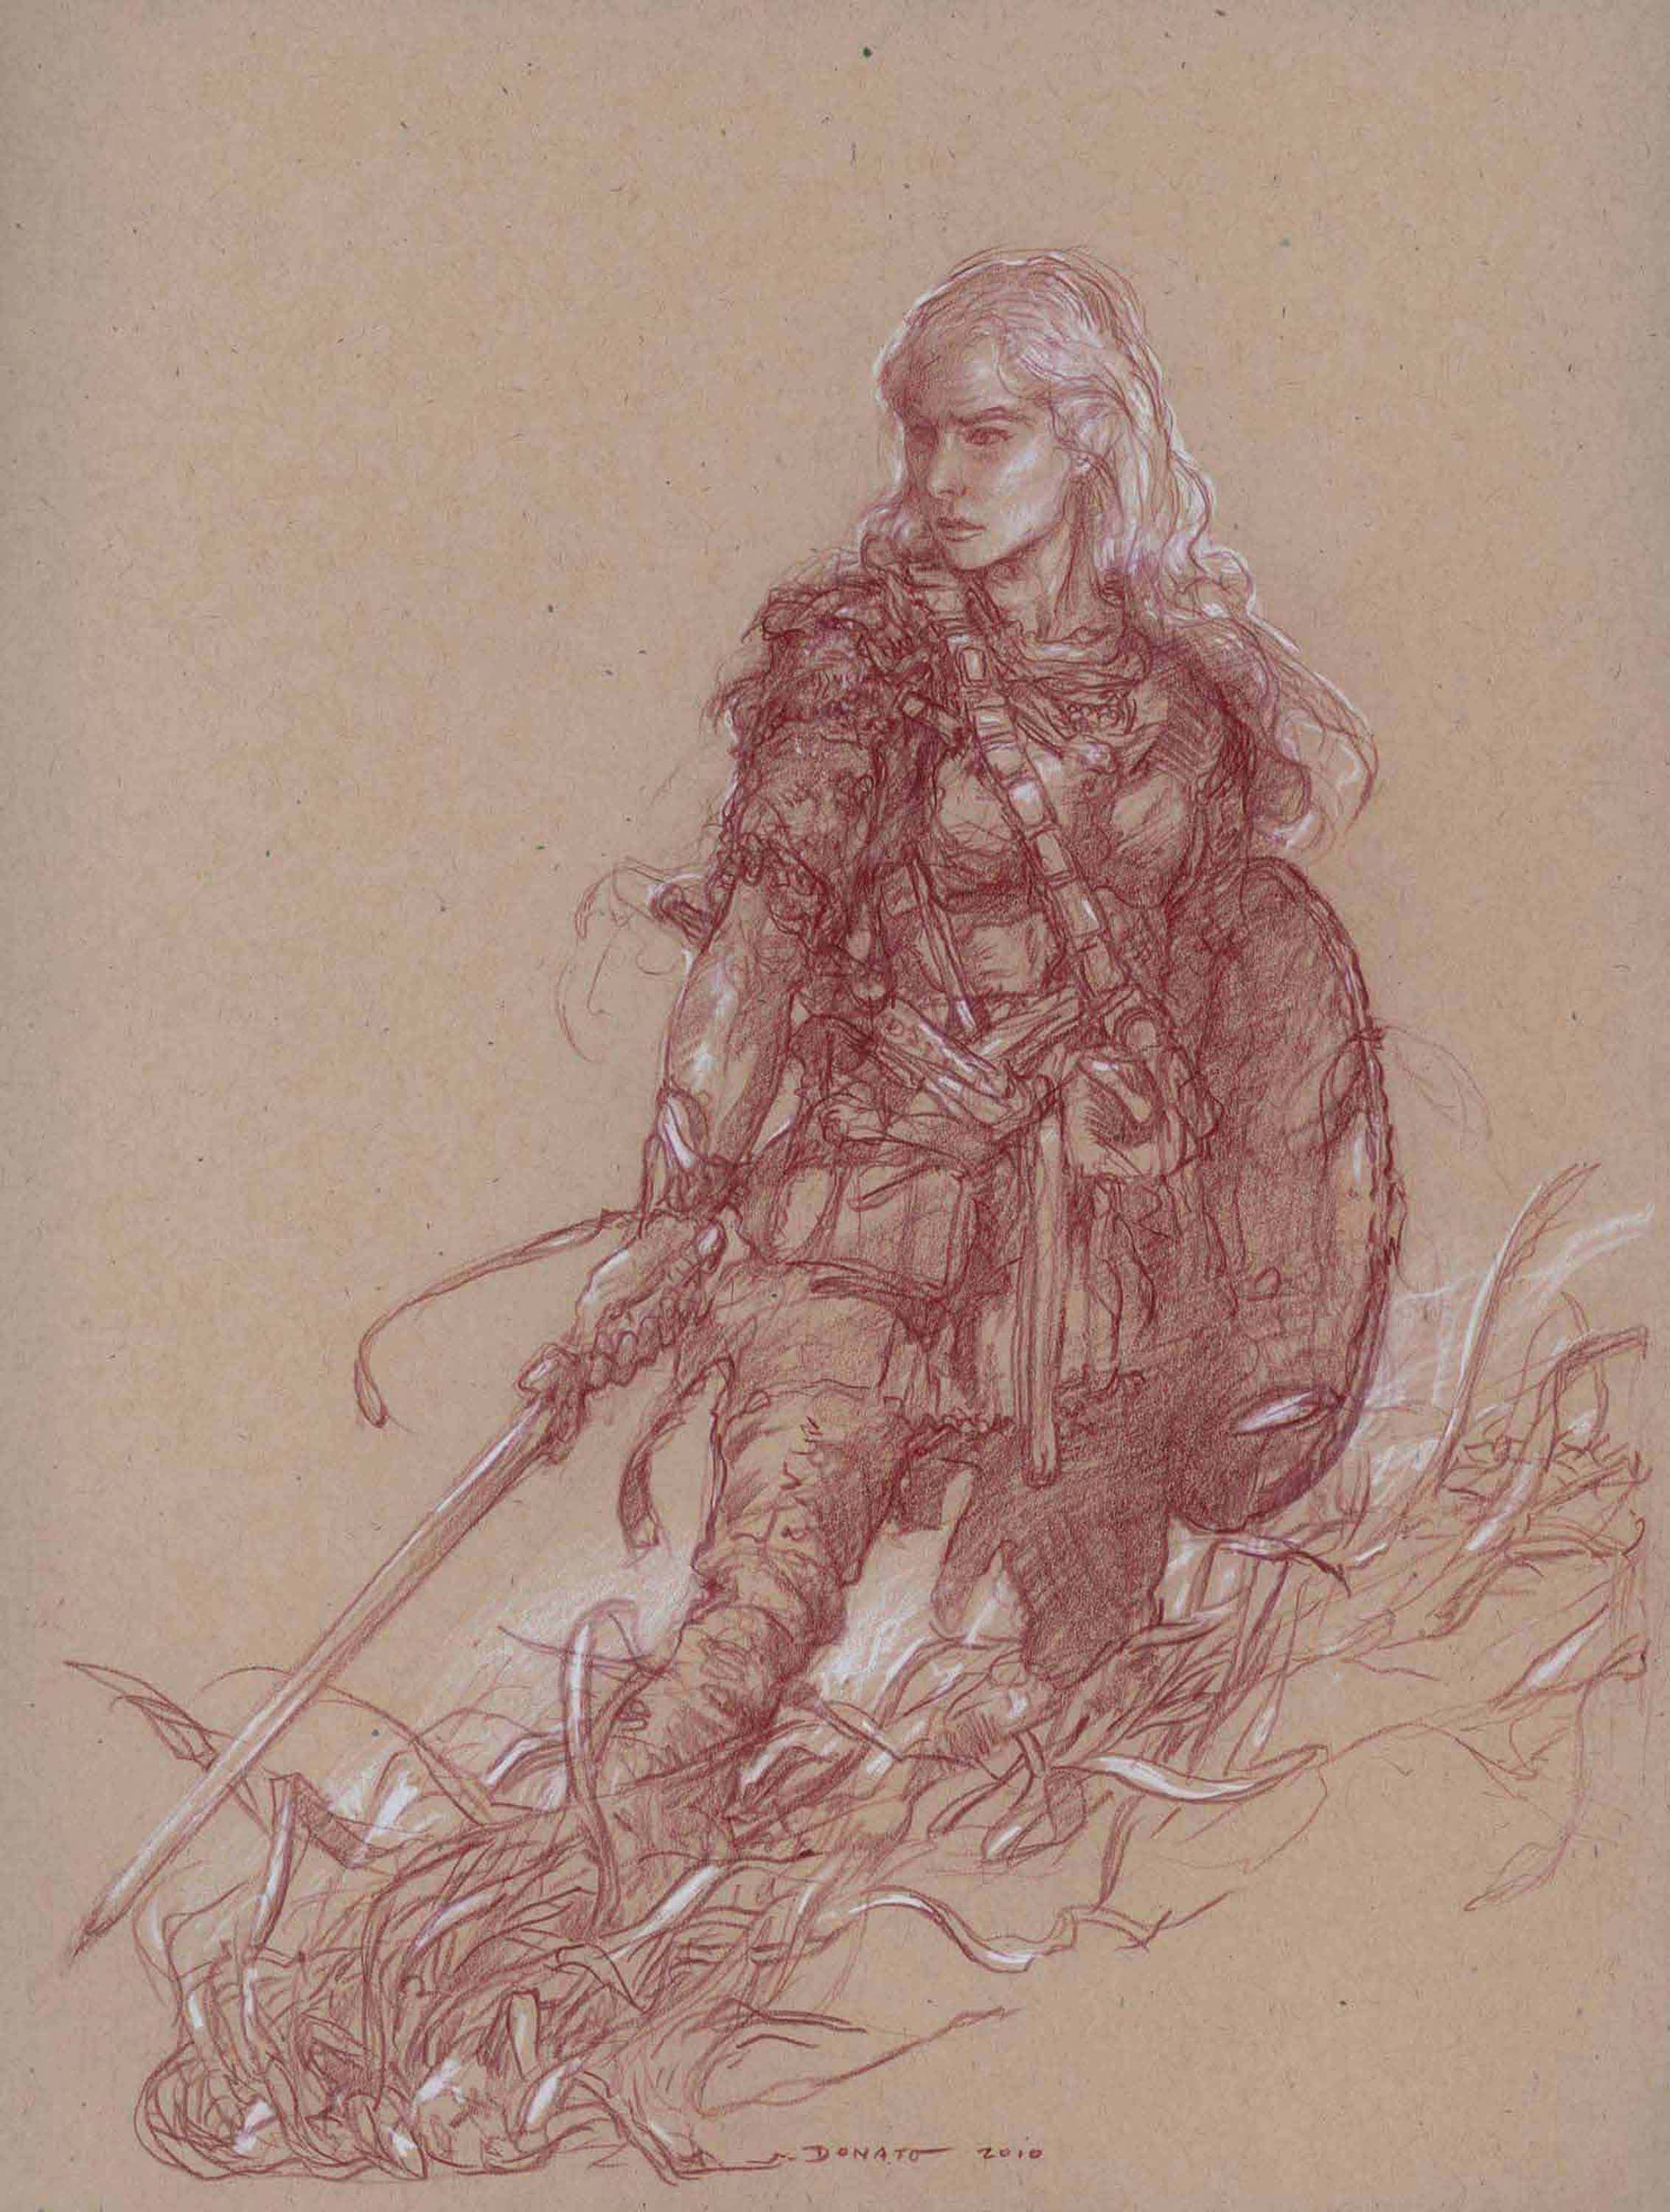 Eowyn - Grasses of Rohan
14" x 11"  Watercolor Pencil and Chalk on Toned paper 2010
private collection